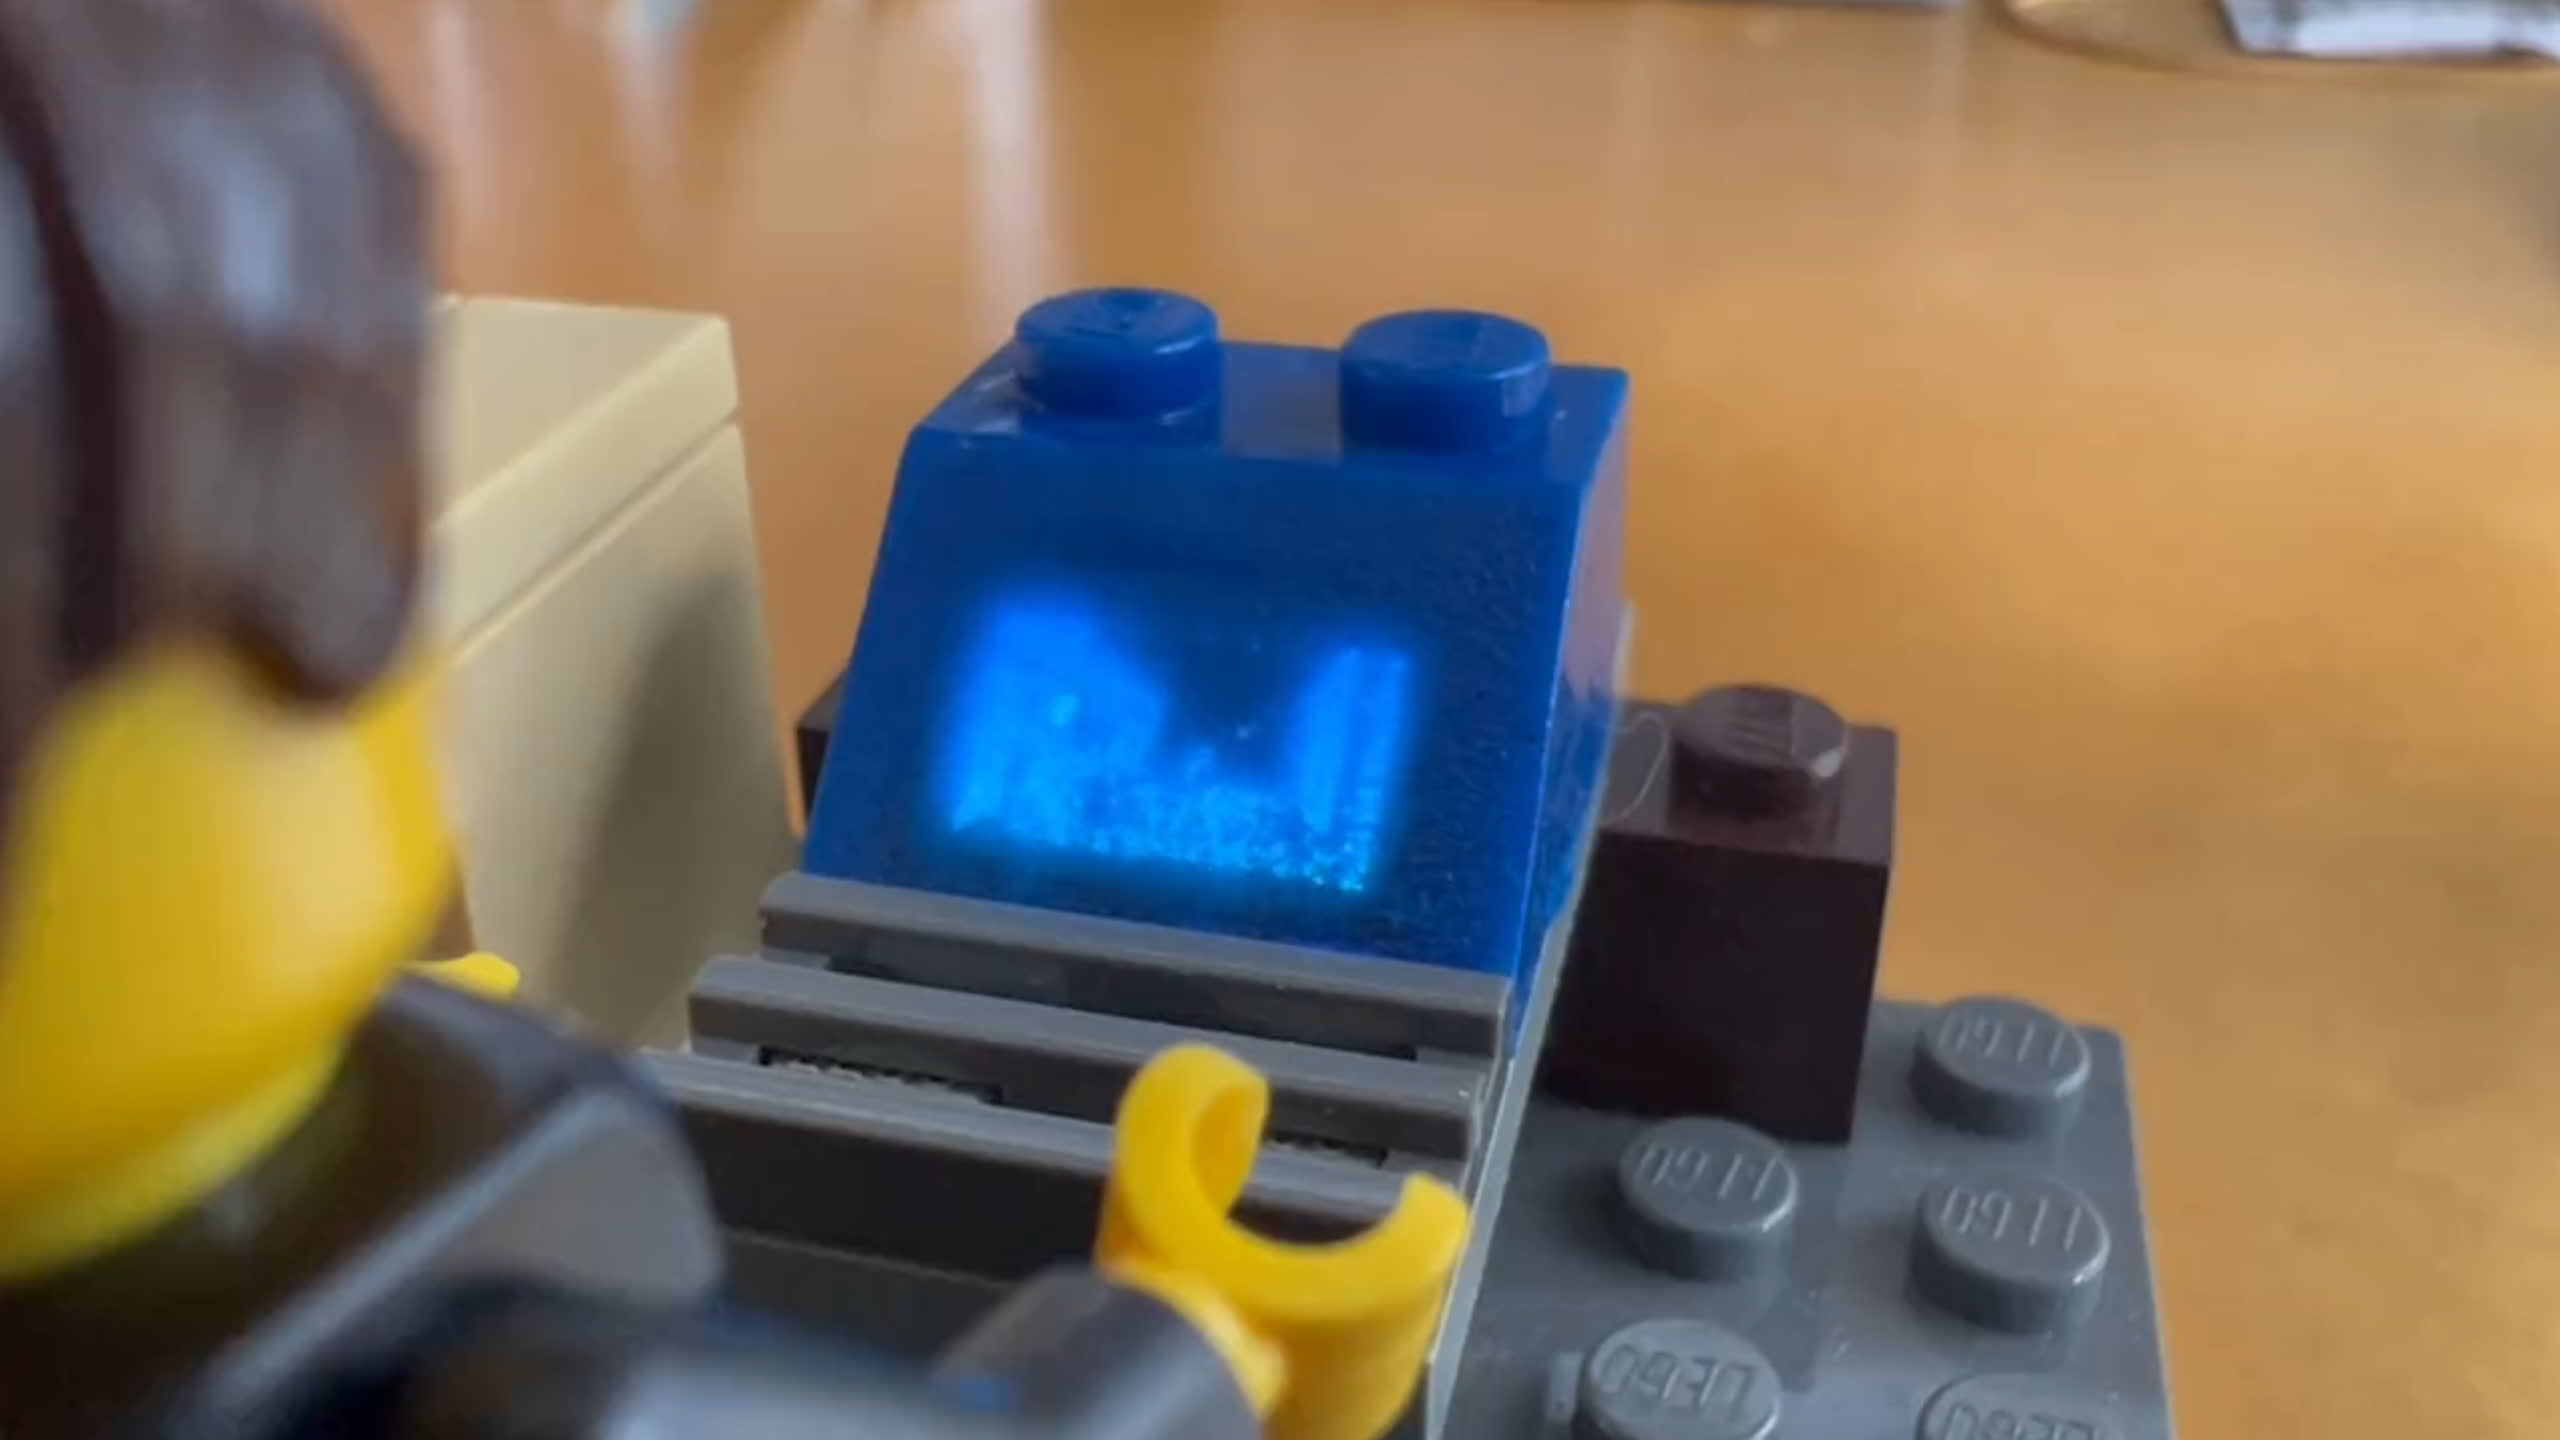 You can now play Doom on a Lego piece